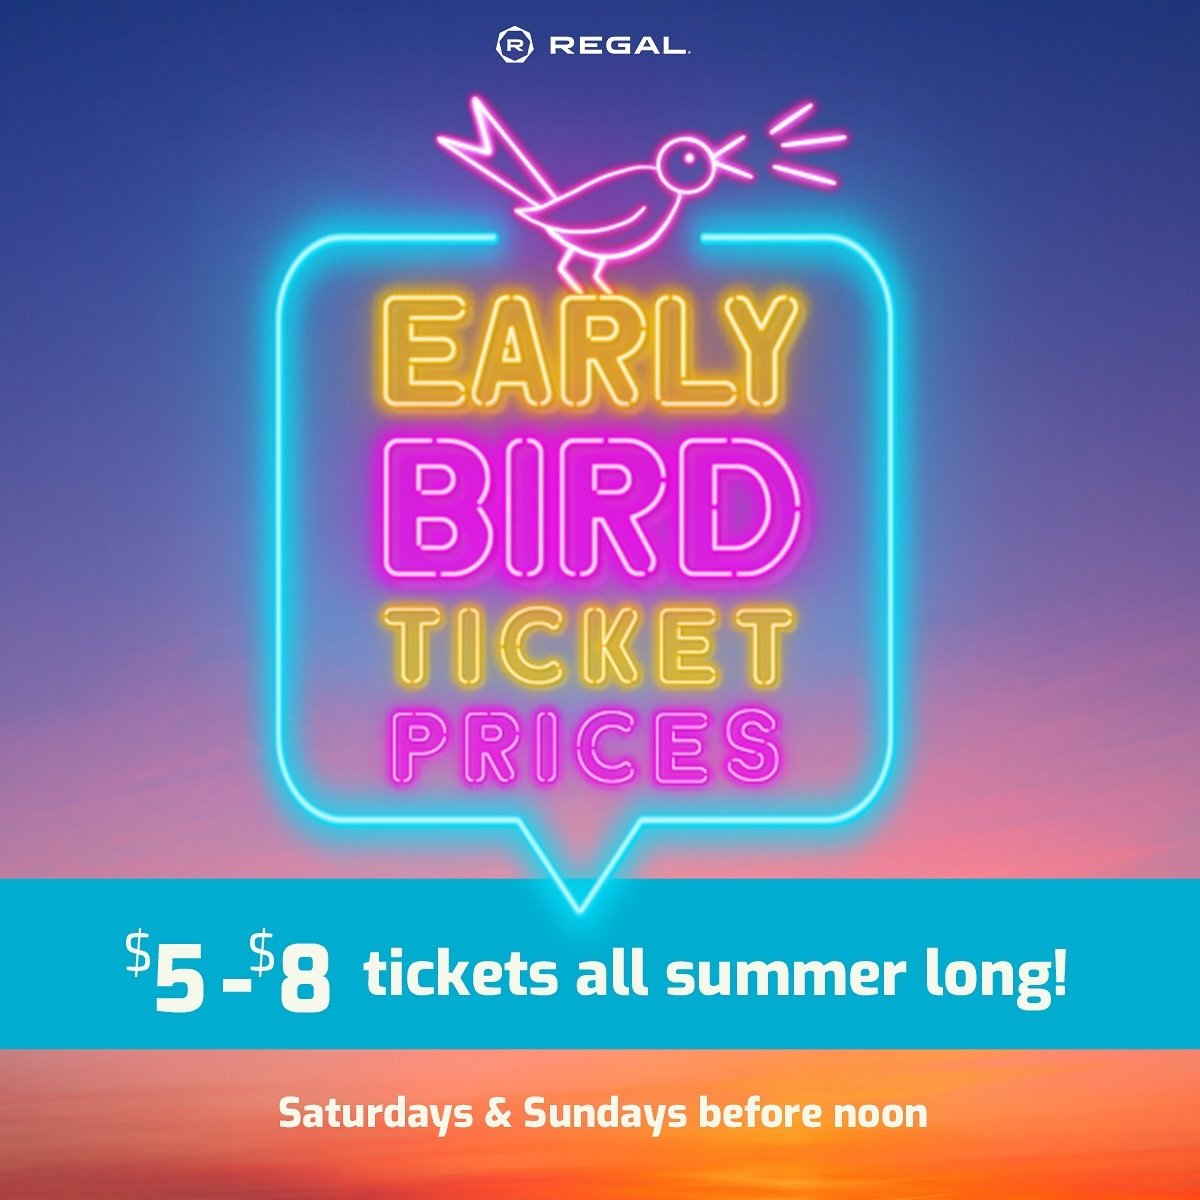 Starting this weekend moviegoers can catch Early Bird ticket pricing for movies before&nbsp;noon&nbsp;on Saturdays and Sundays at @regalmovies throughout the summer 🏖.&nbsp;Starting&nbsp;as early as&nbsp;10am, tickets will be available for&nbsp;just